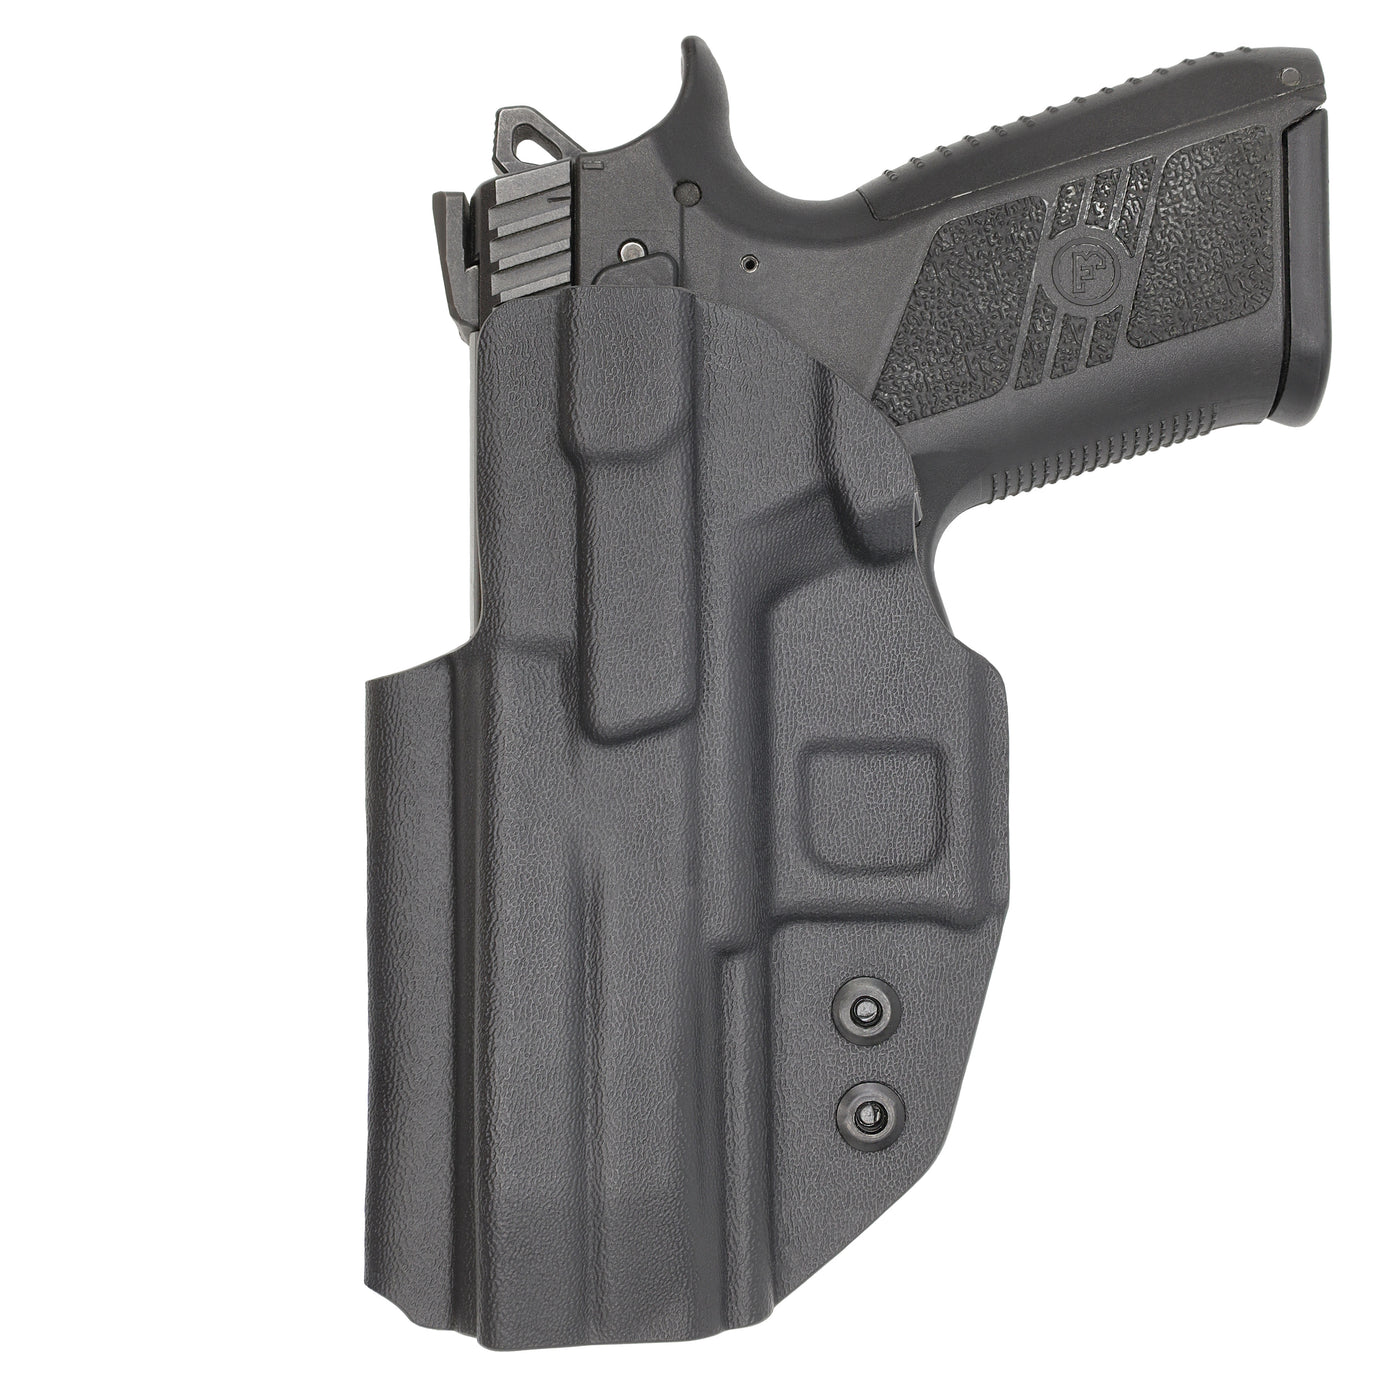 C&G Holsters custom IWB Covert CZ P07 in holstered position back view